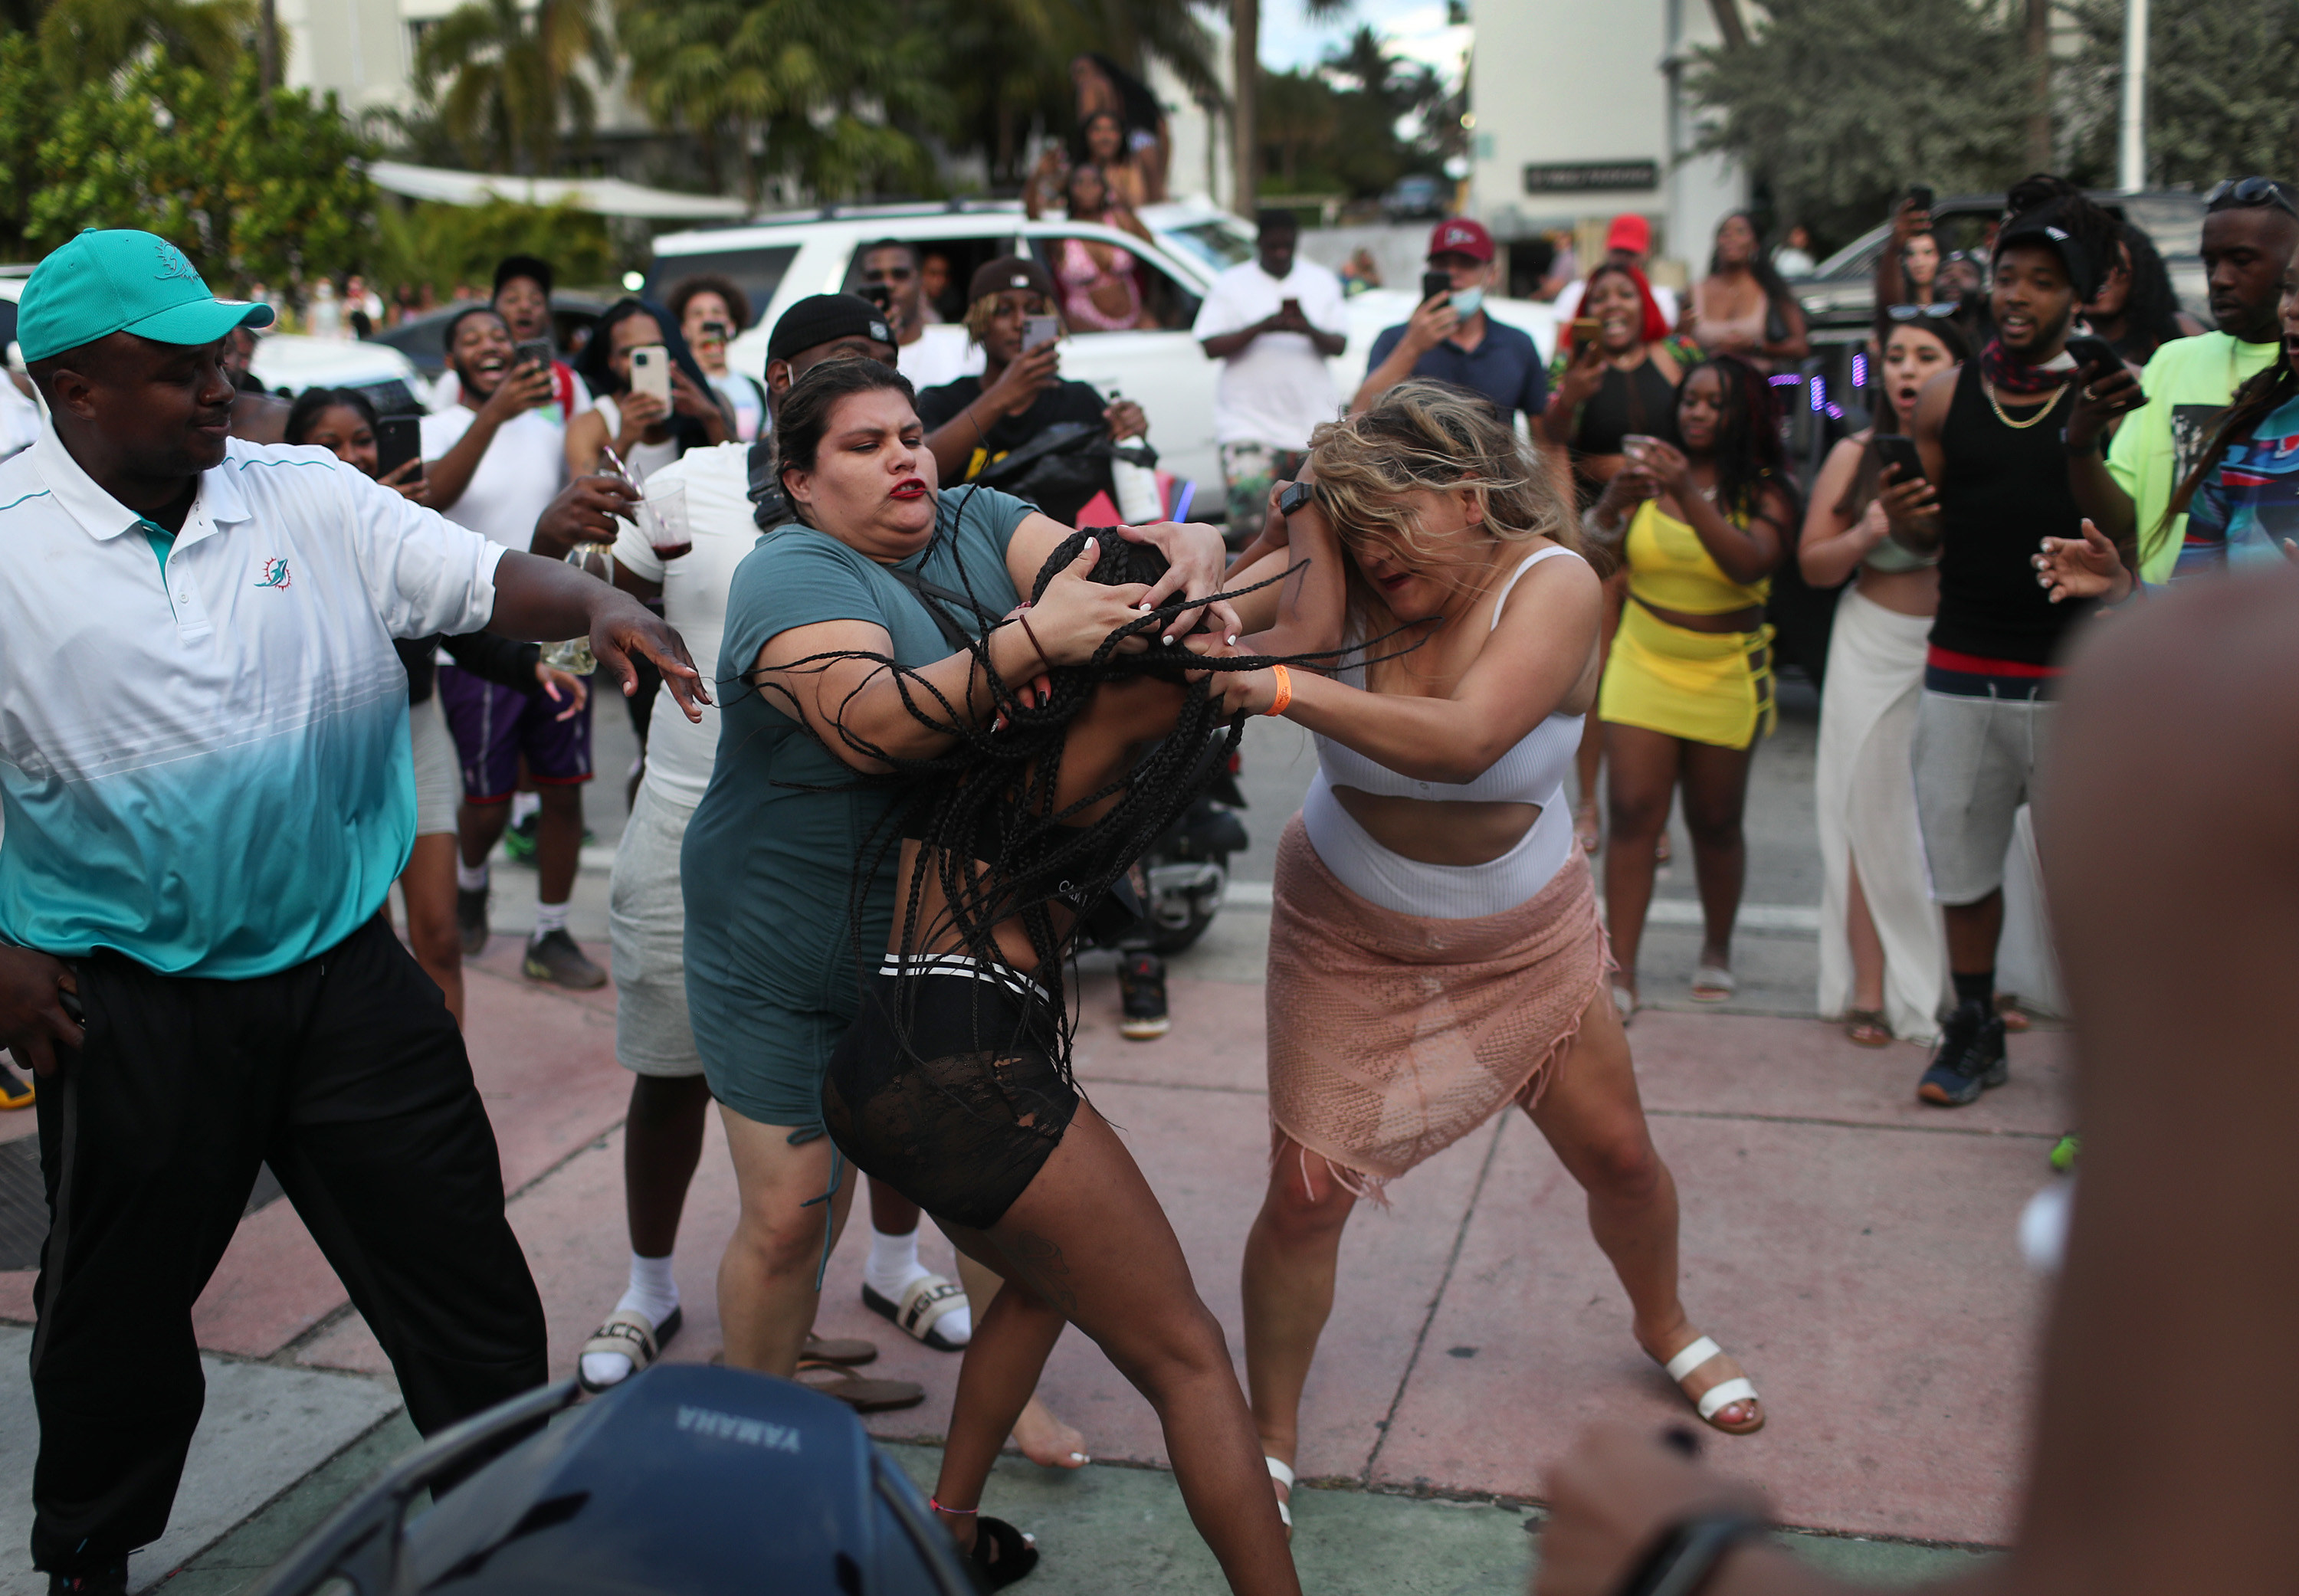 Three women fight while the crowd films it